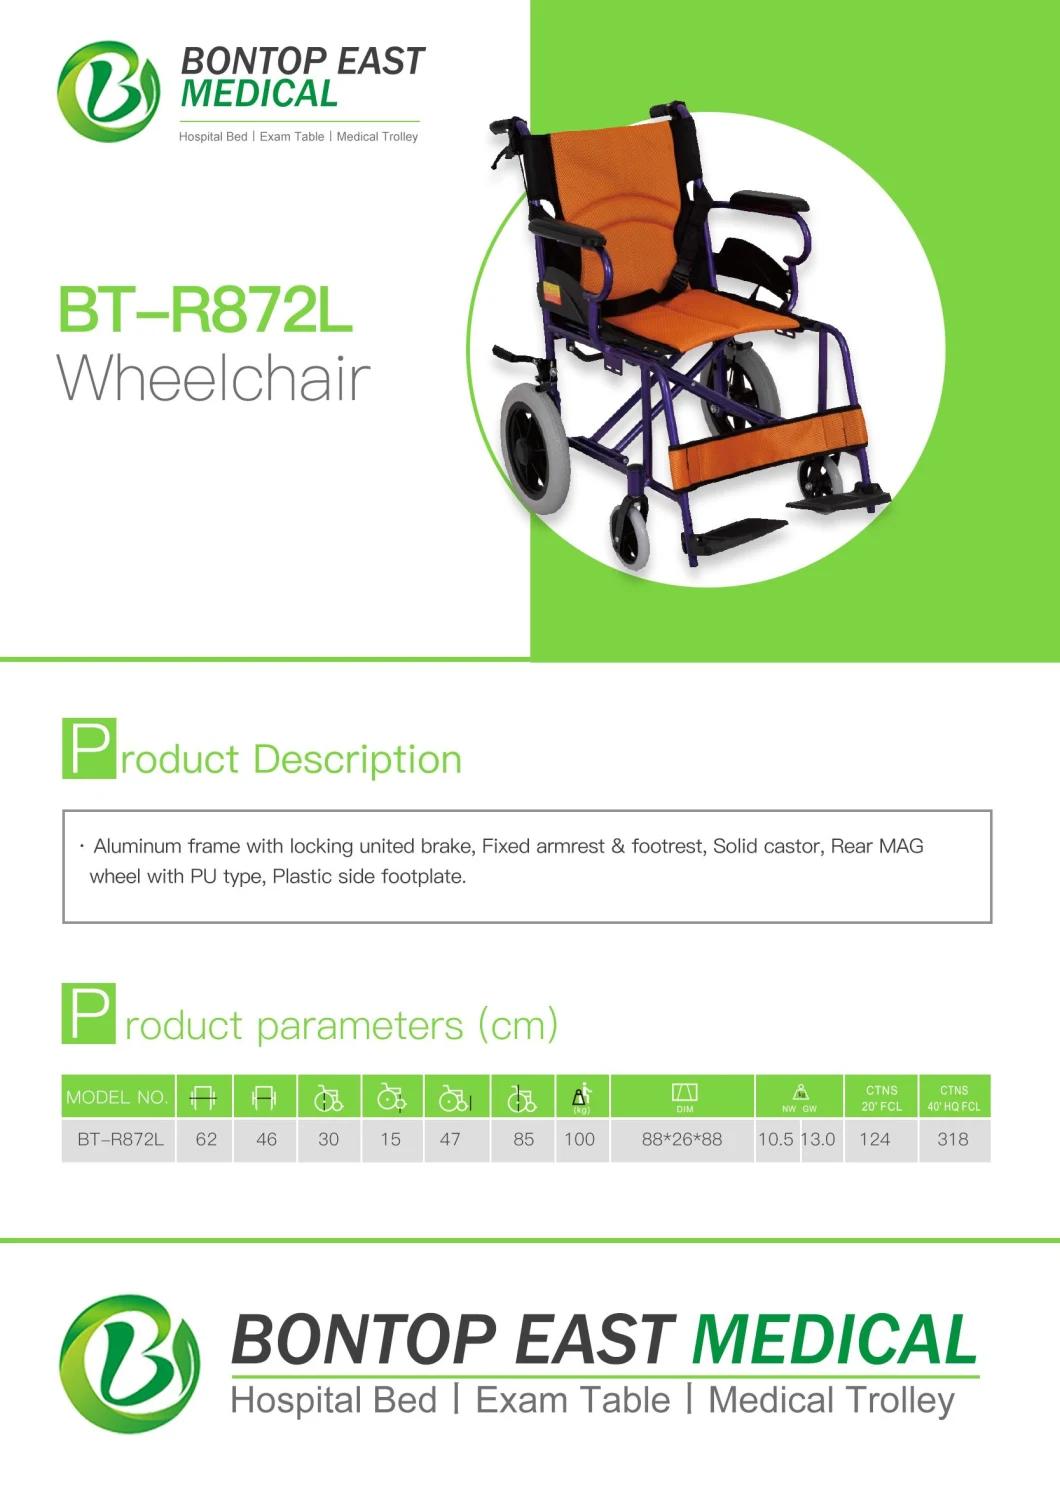 Aluminum Folding Wheelchair Der Rollstuhl Invalid Carriage for Disabled People